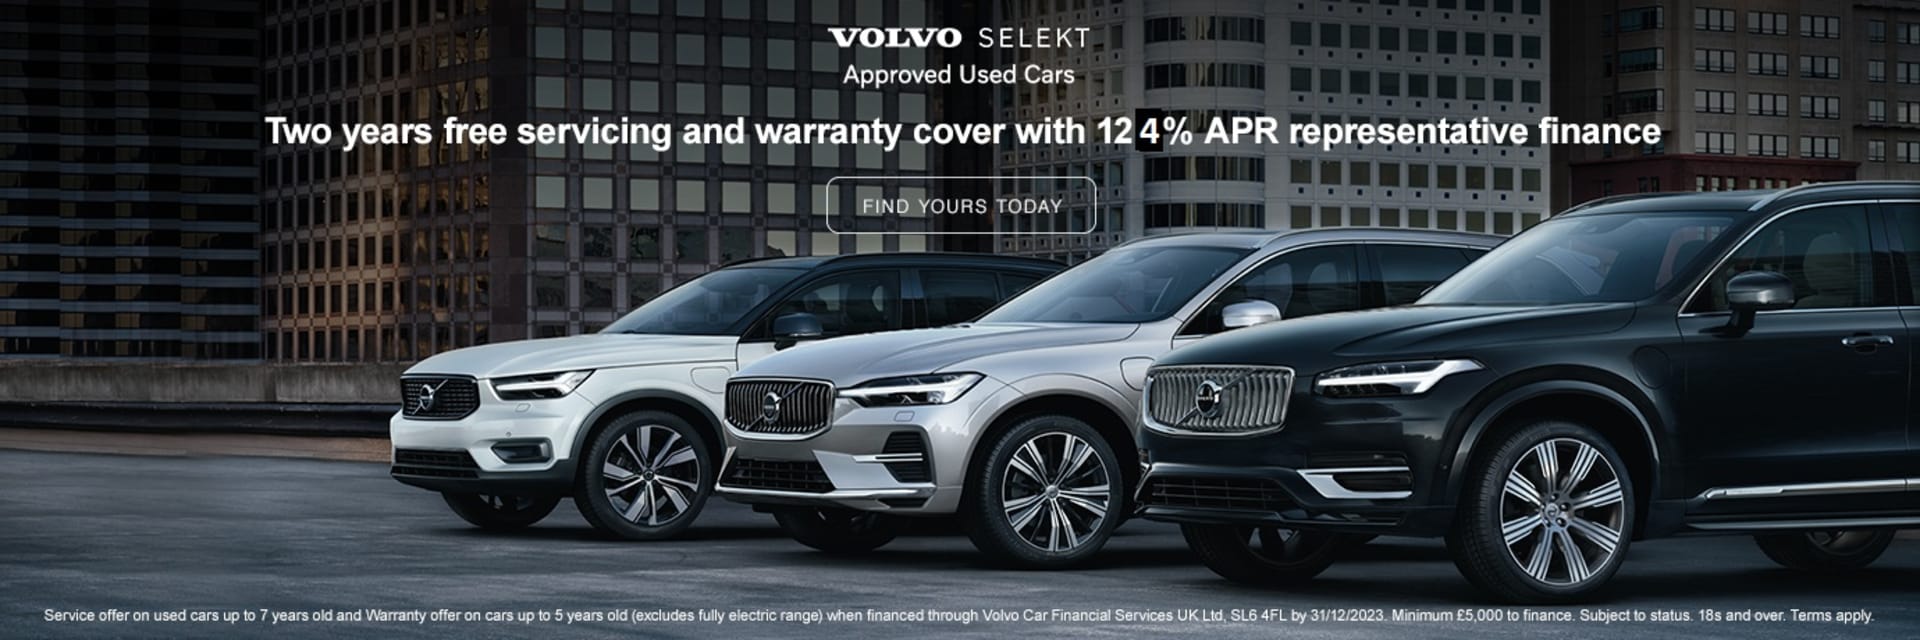 Two Years Free Servicing & Warranty Cover